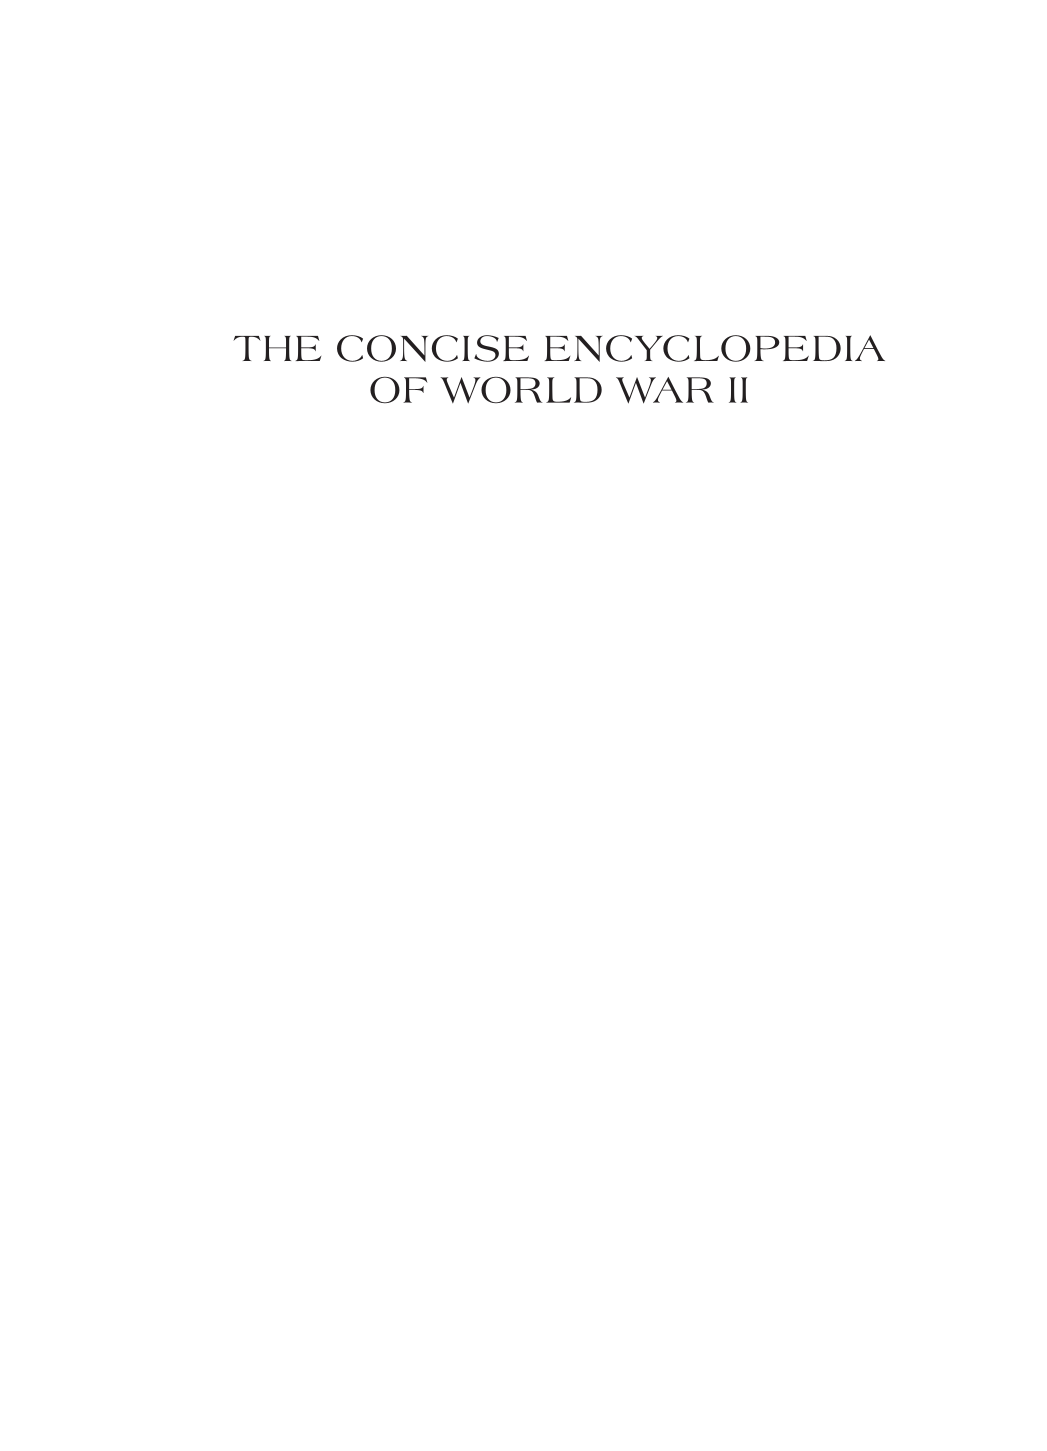 The Concise Encyclopedia of World War II [2 volumes] page Vol1:i